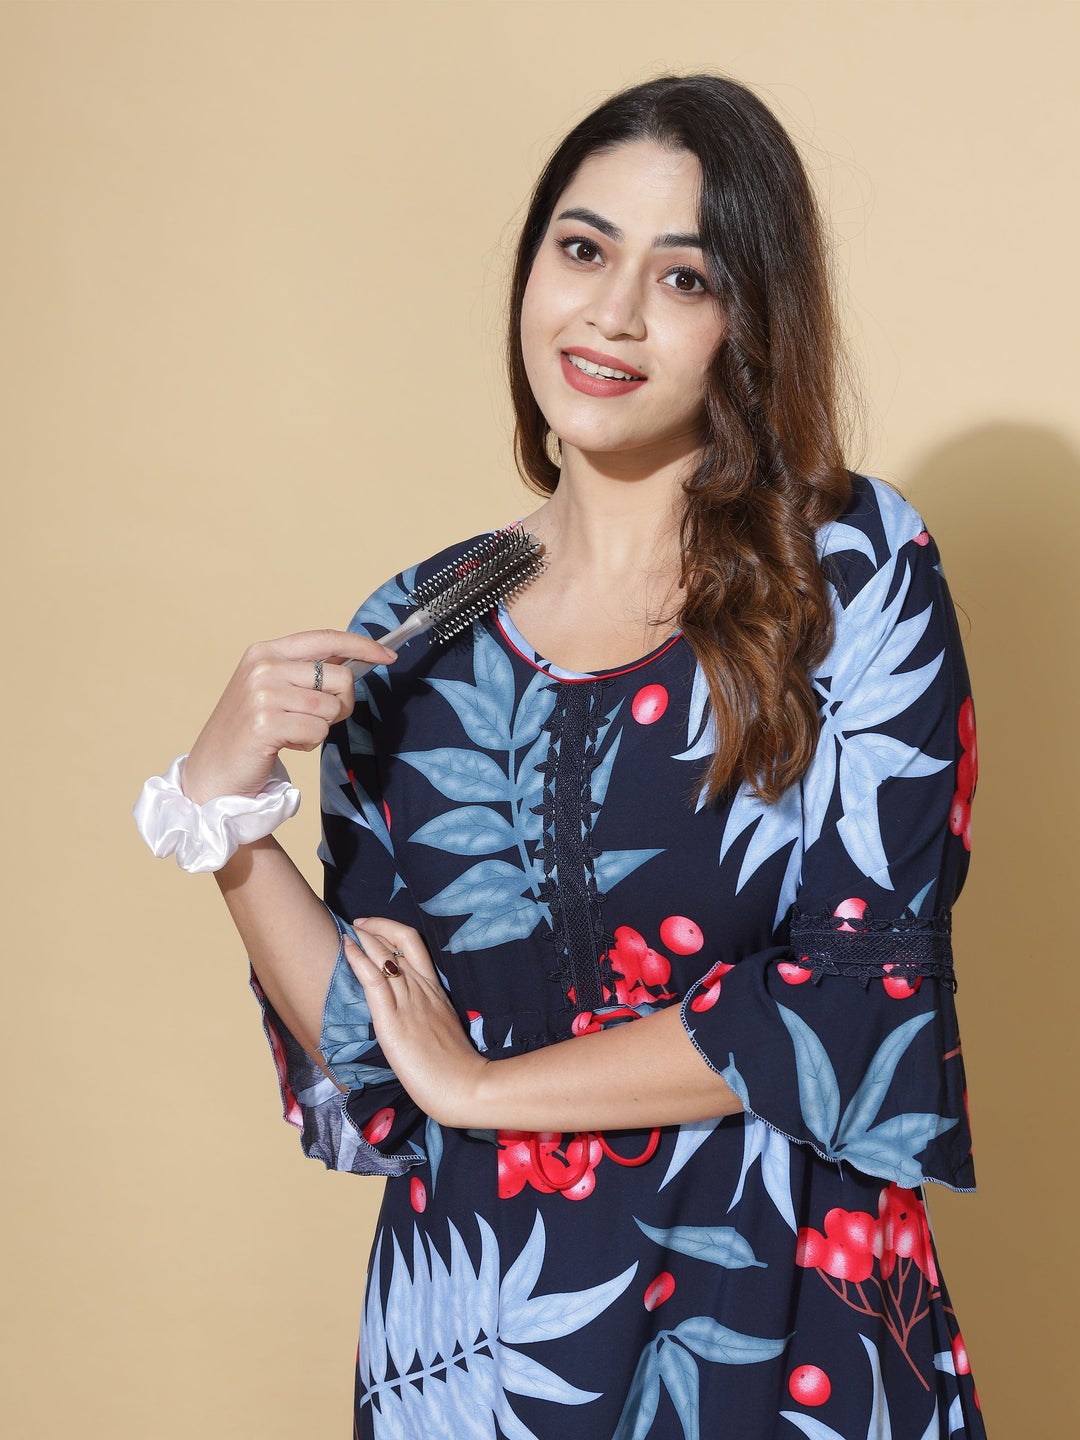  Rayon Designer Nighty  Buy Trendy Blue and Black Rayon Nighty Online at 9shines Label- 9shines label 